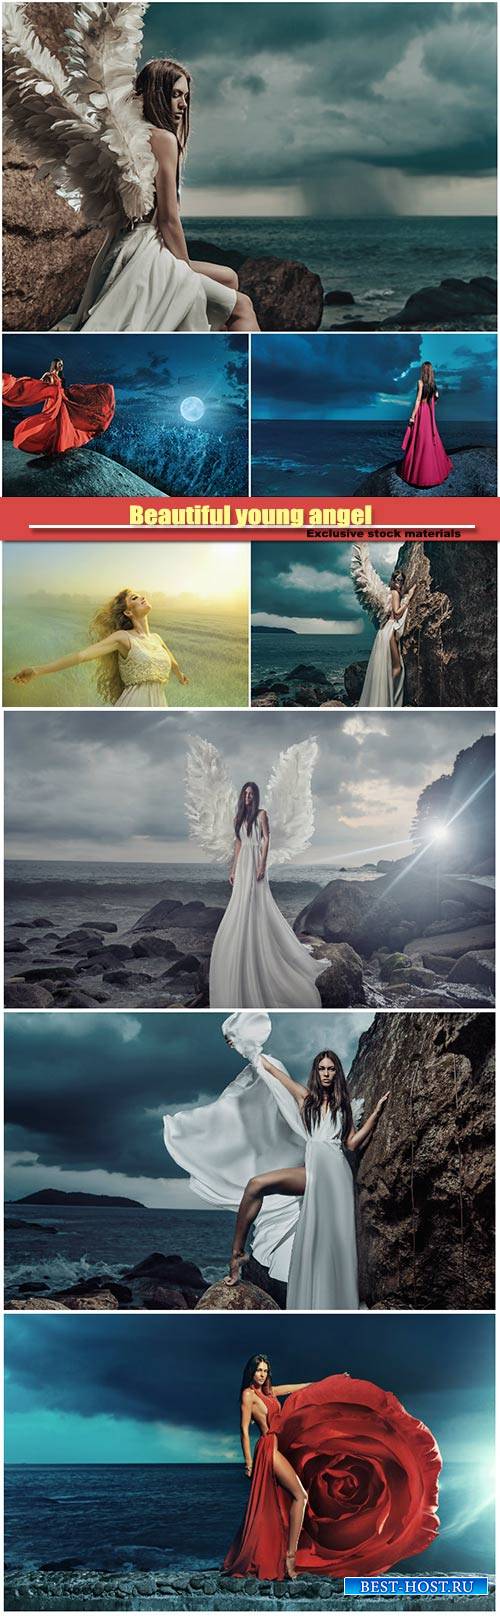 Beautiful young angel climbing on the cliff, lady looking at the storm on the ocean